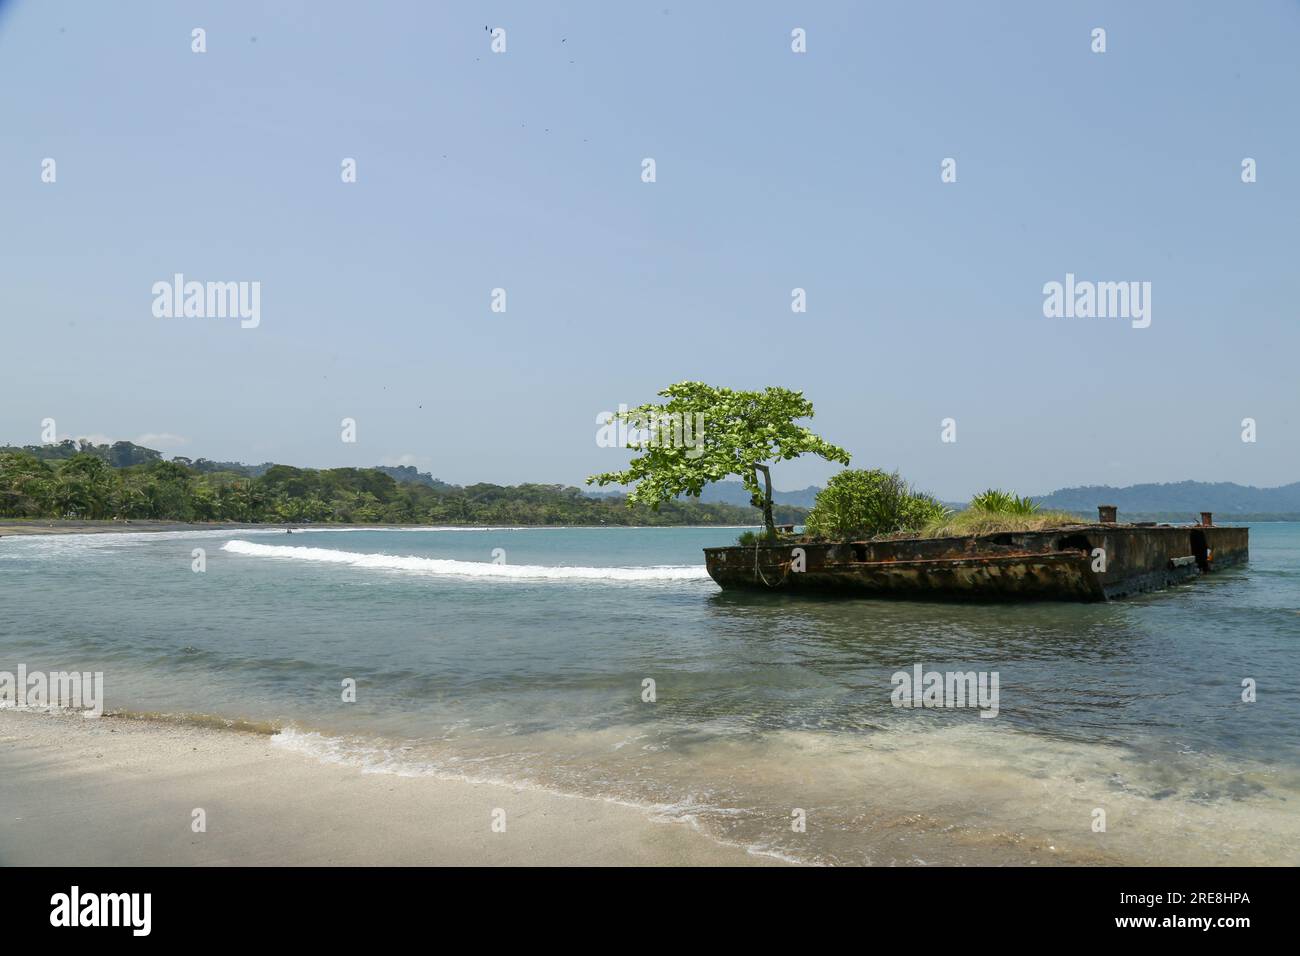 Wreck of floating platform with vegetation beached in front of Puerto Viejo de Talamanca, called 'El barco con arbol'. Stock Photo